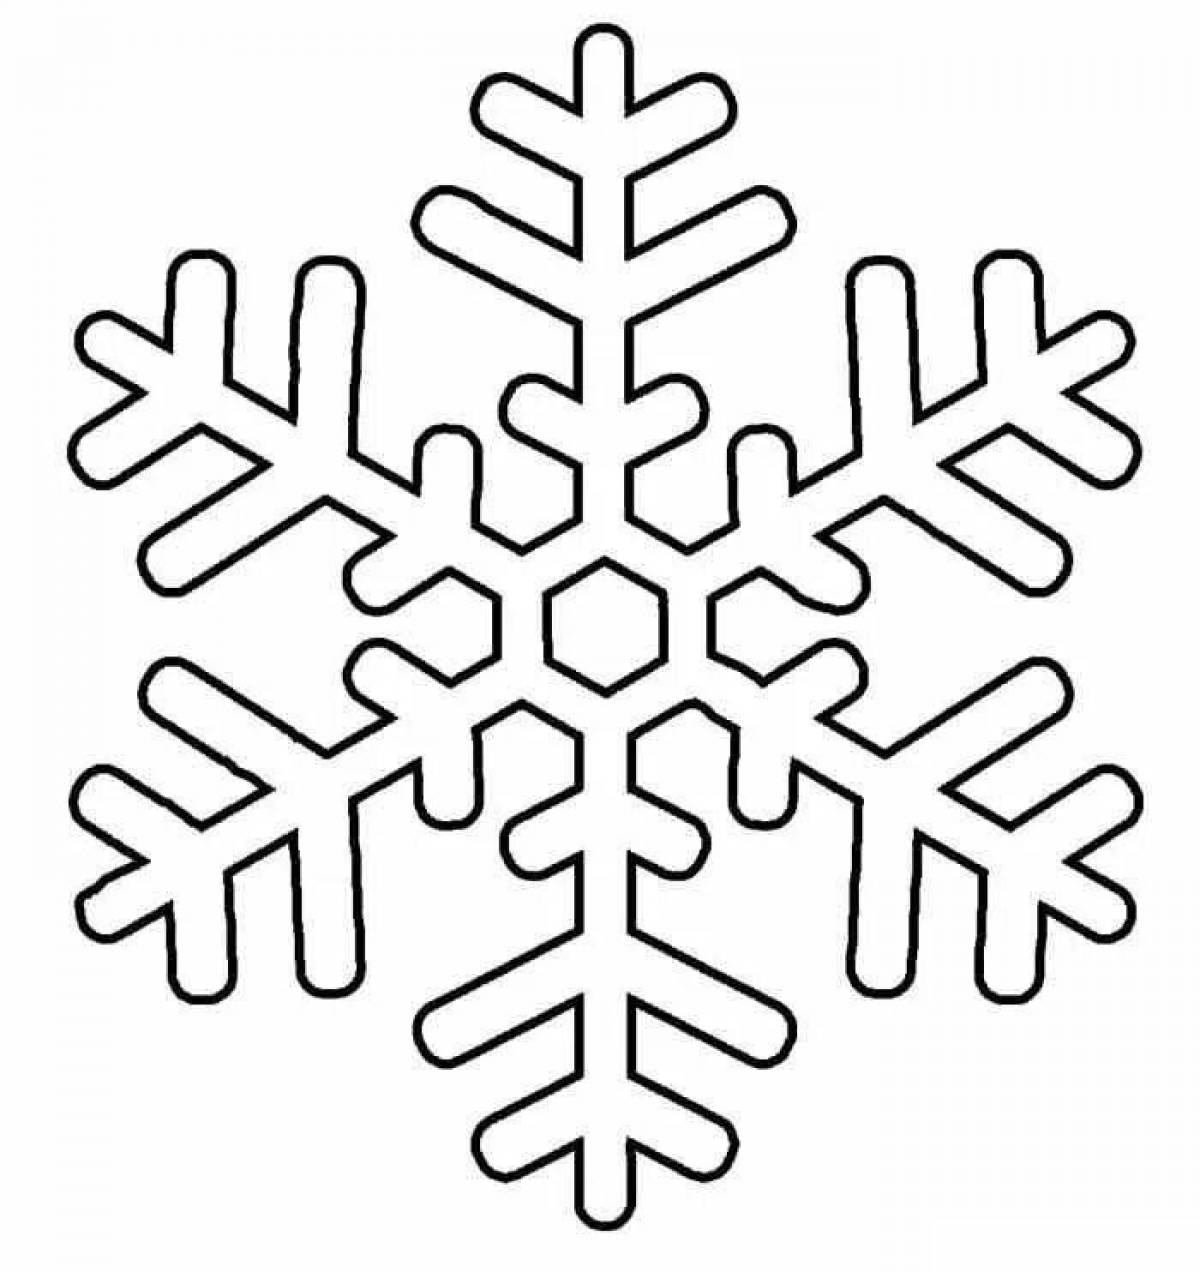 Creative snowflake coloring for kids